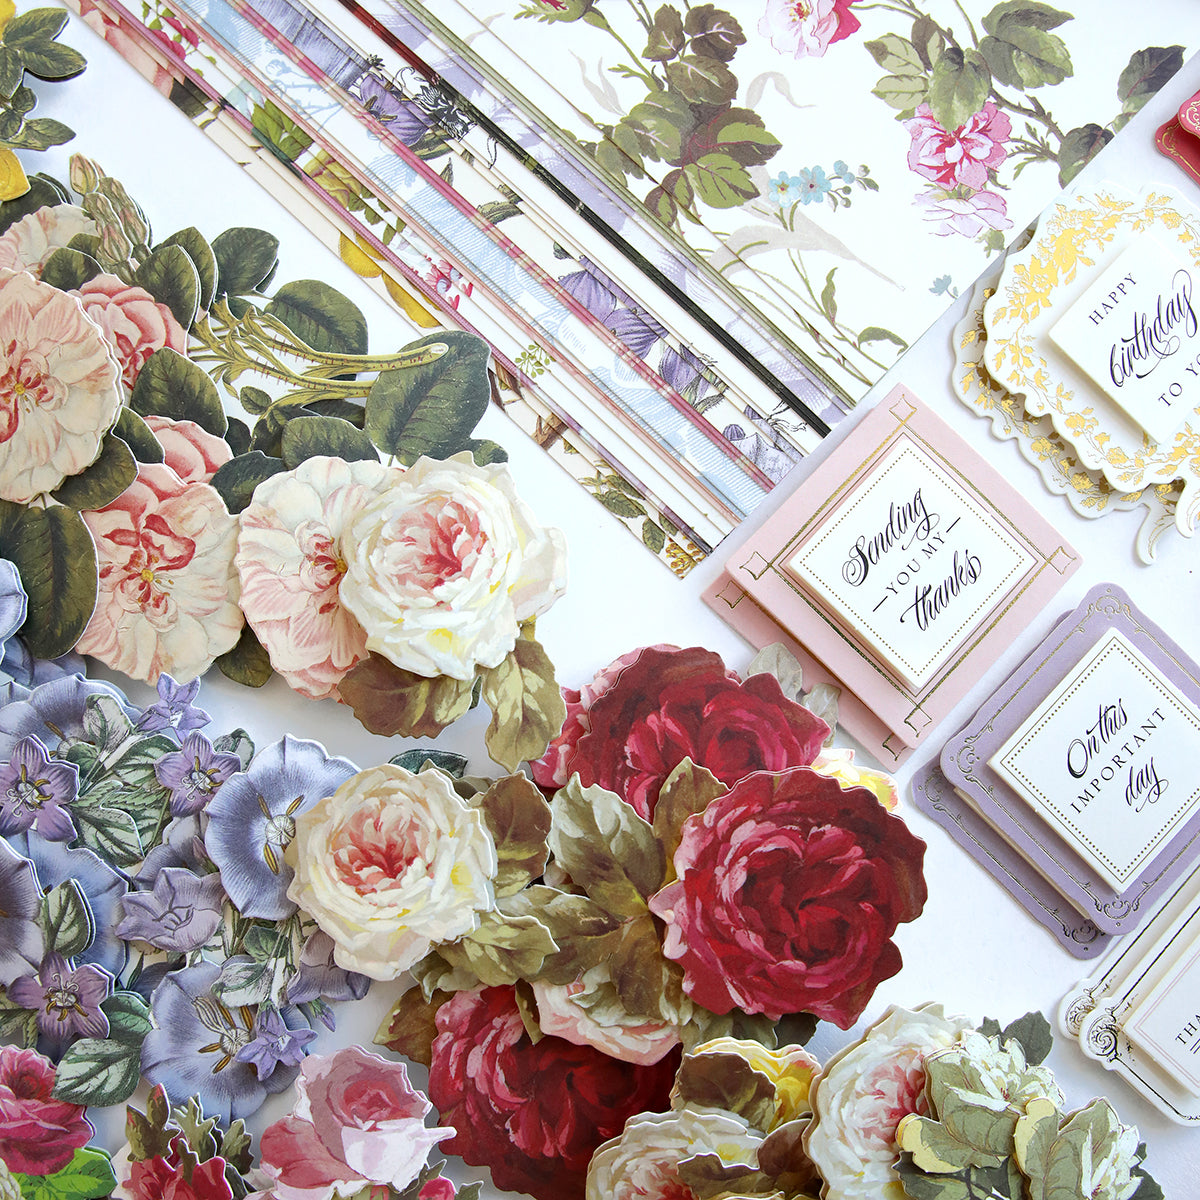 Anniversary Paper Crafting Collection's first designs of floral paper flowers and cards are laid out on a table for scrapbooking.